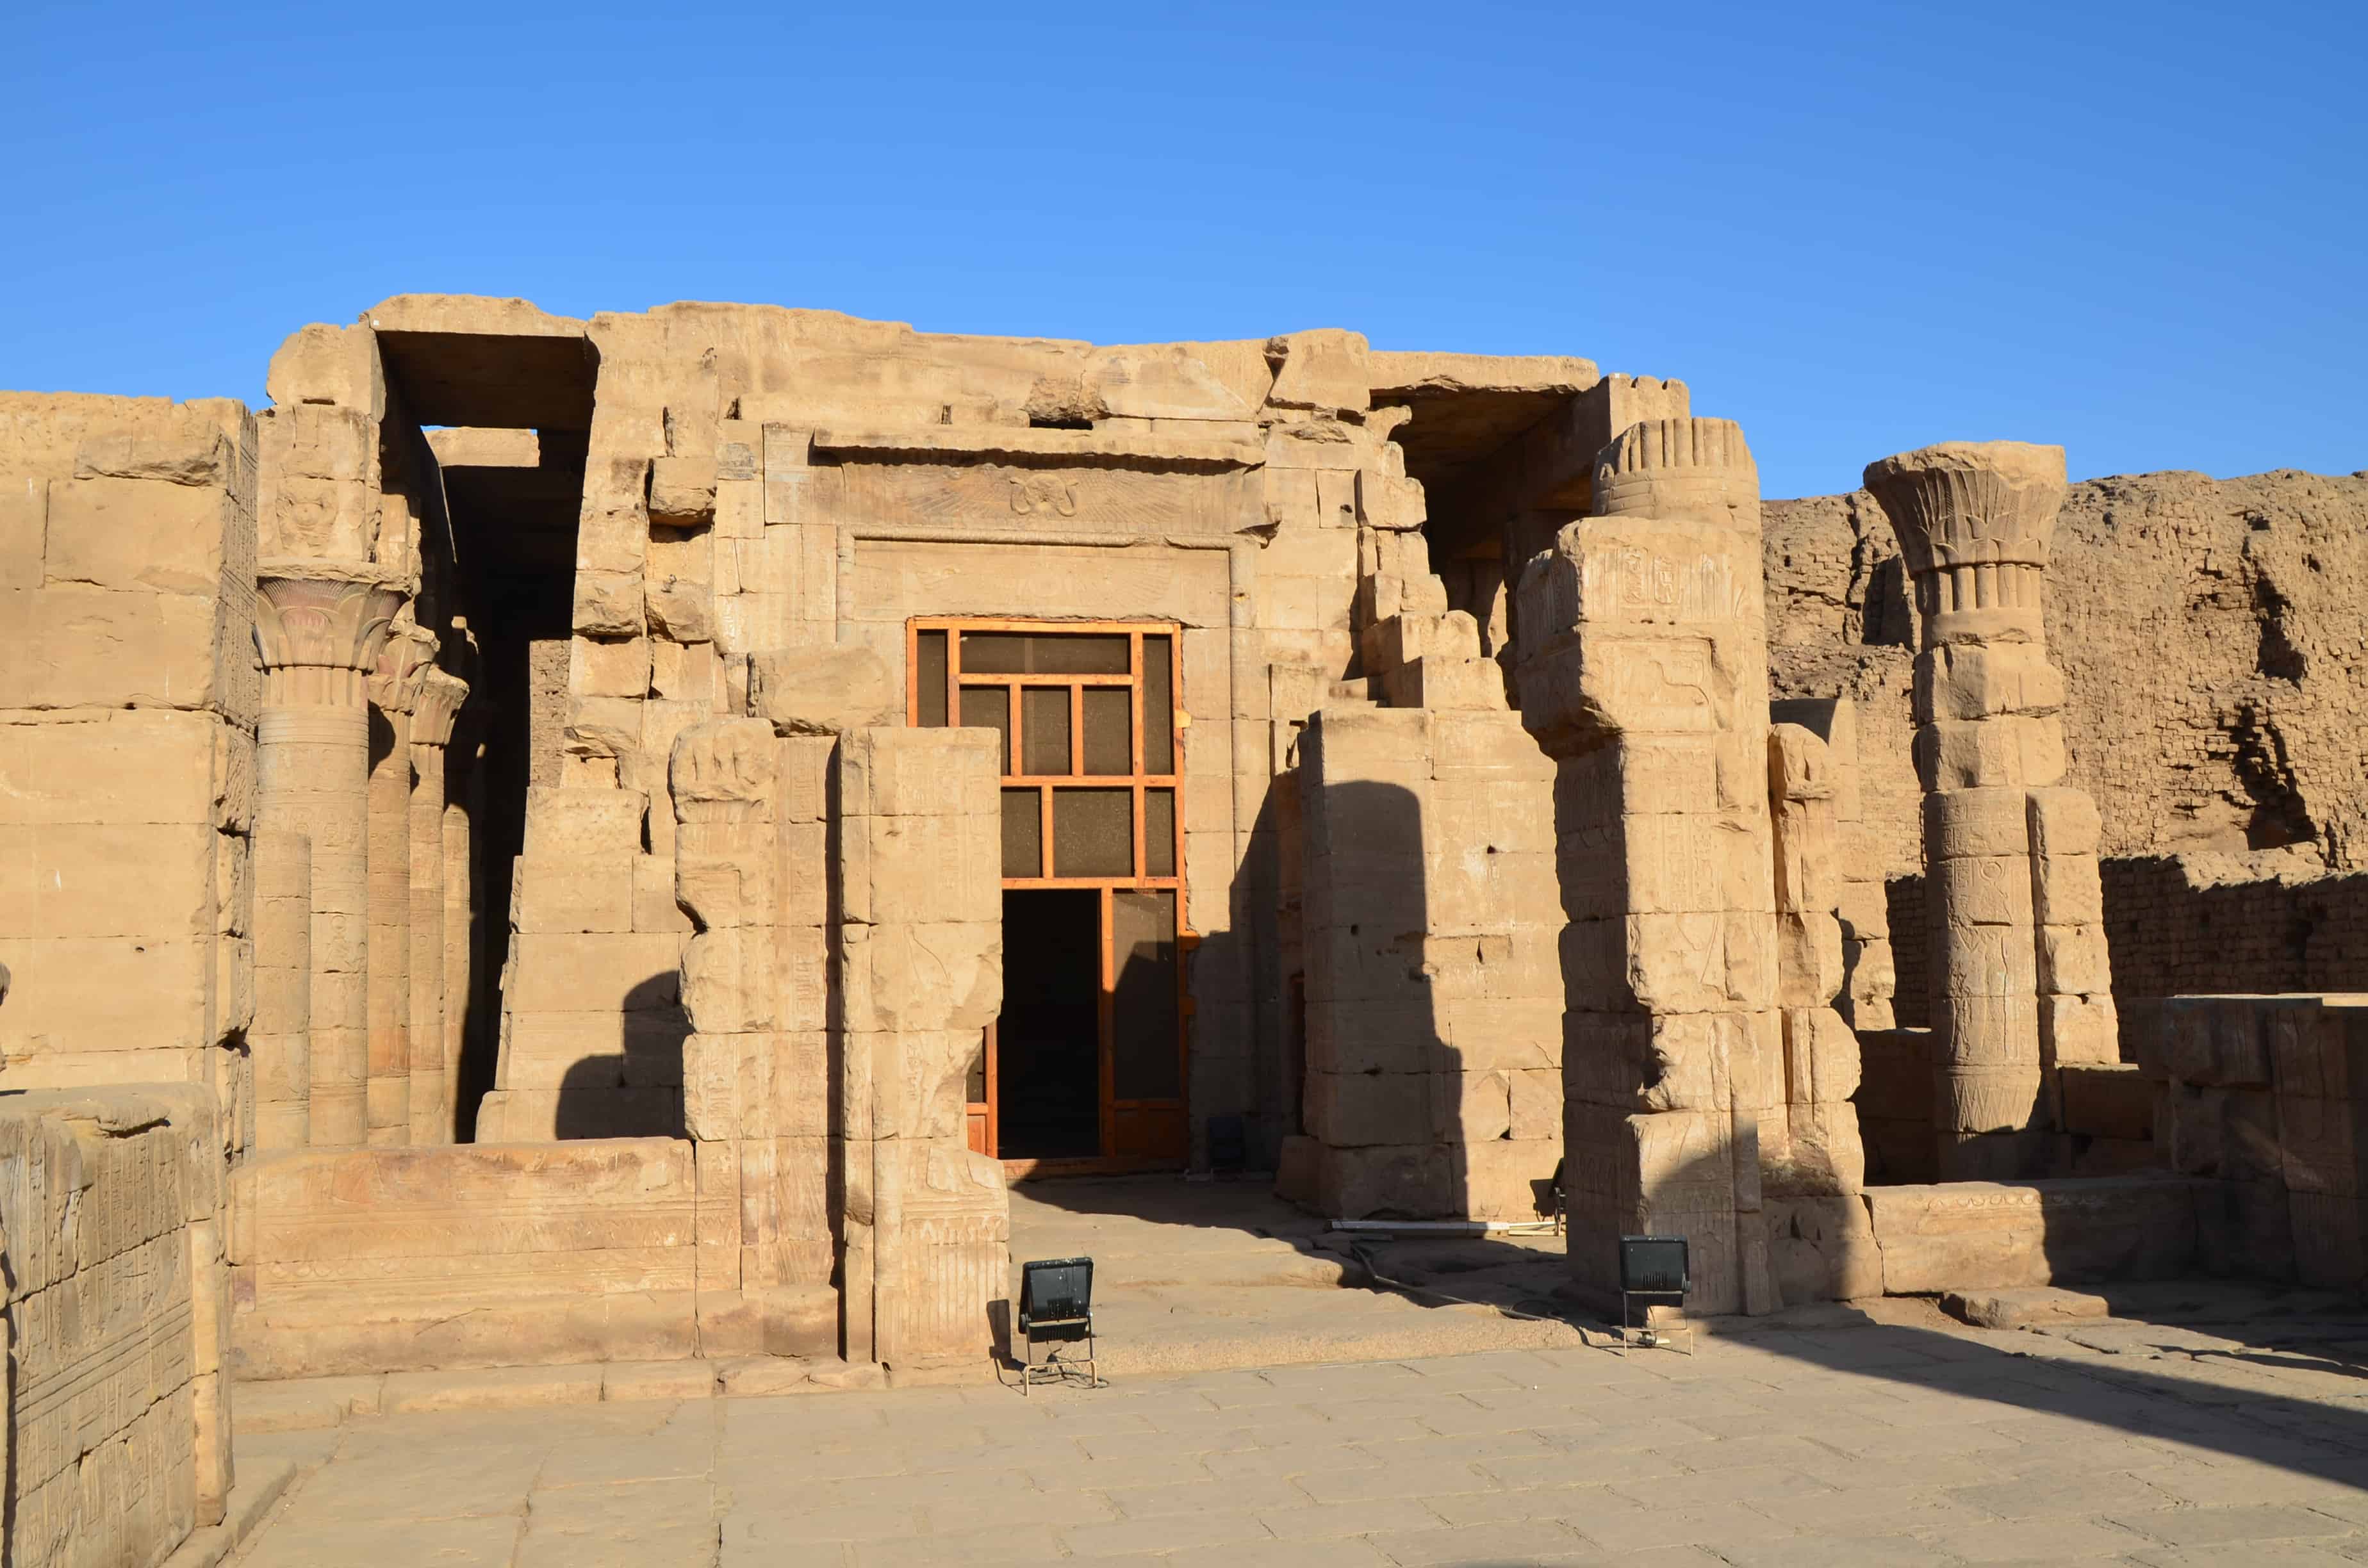 Outer temple at the Temple of Edfu, Egypt